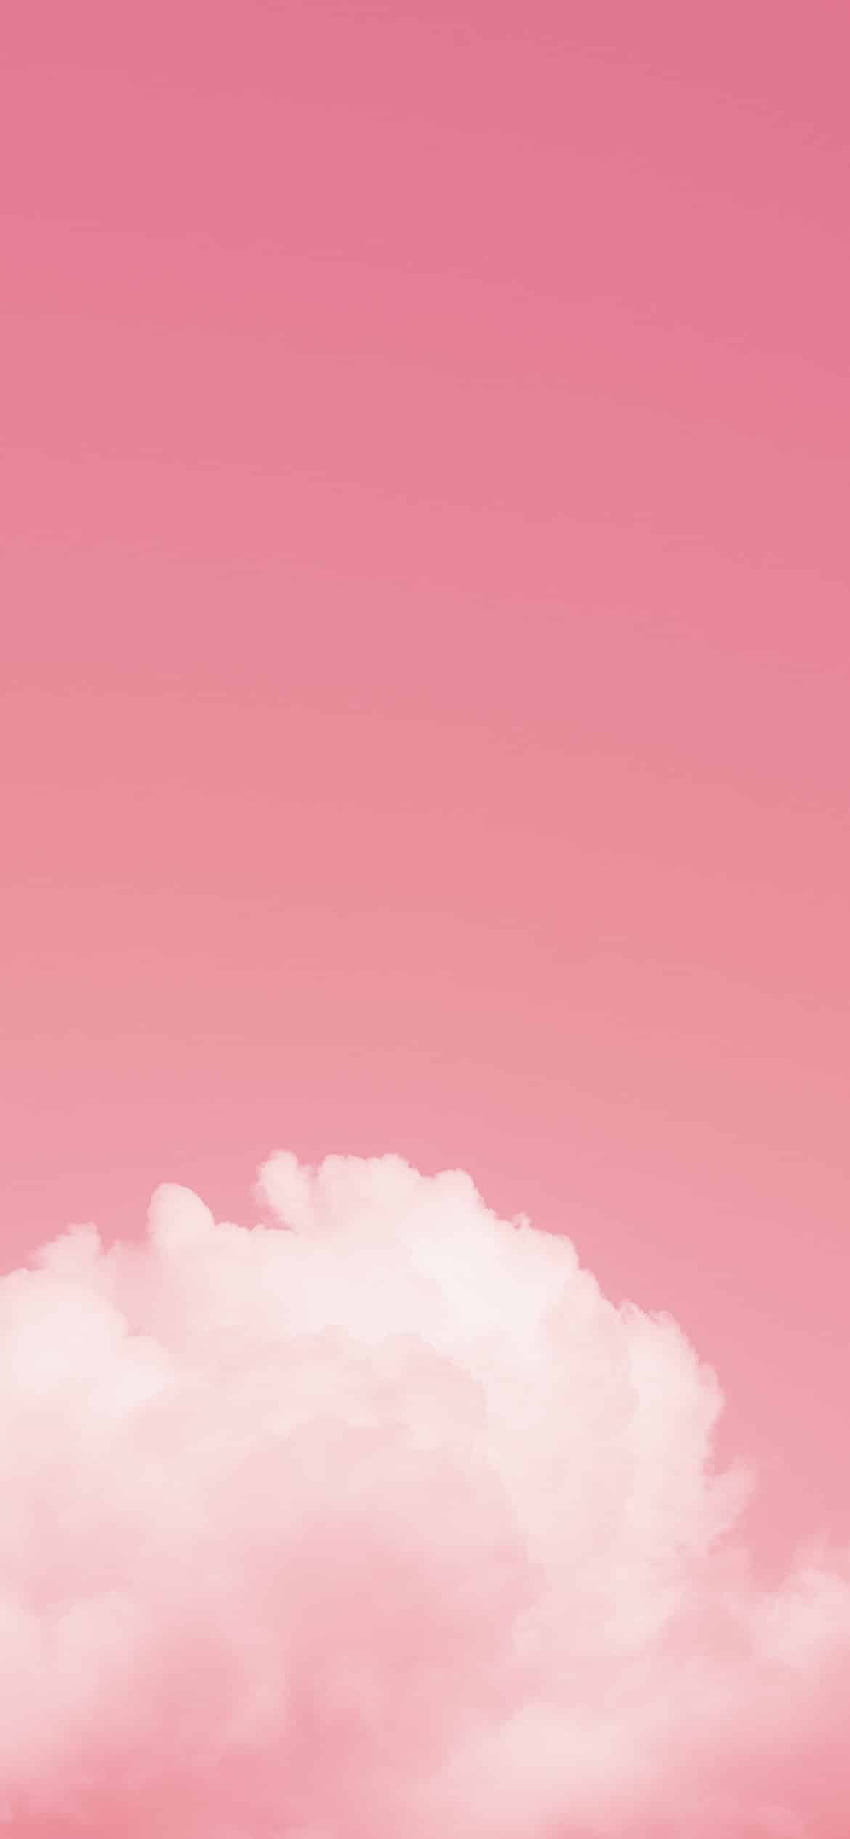 45 Pink Aesthetic Backgrounds You Need For Your Phone Right Now!, sky pink aesthetic HD phone wallpaper